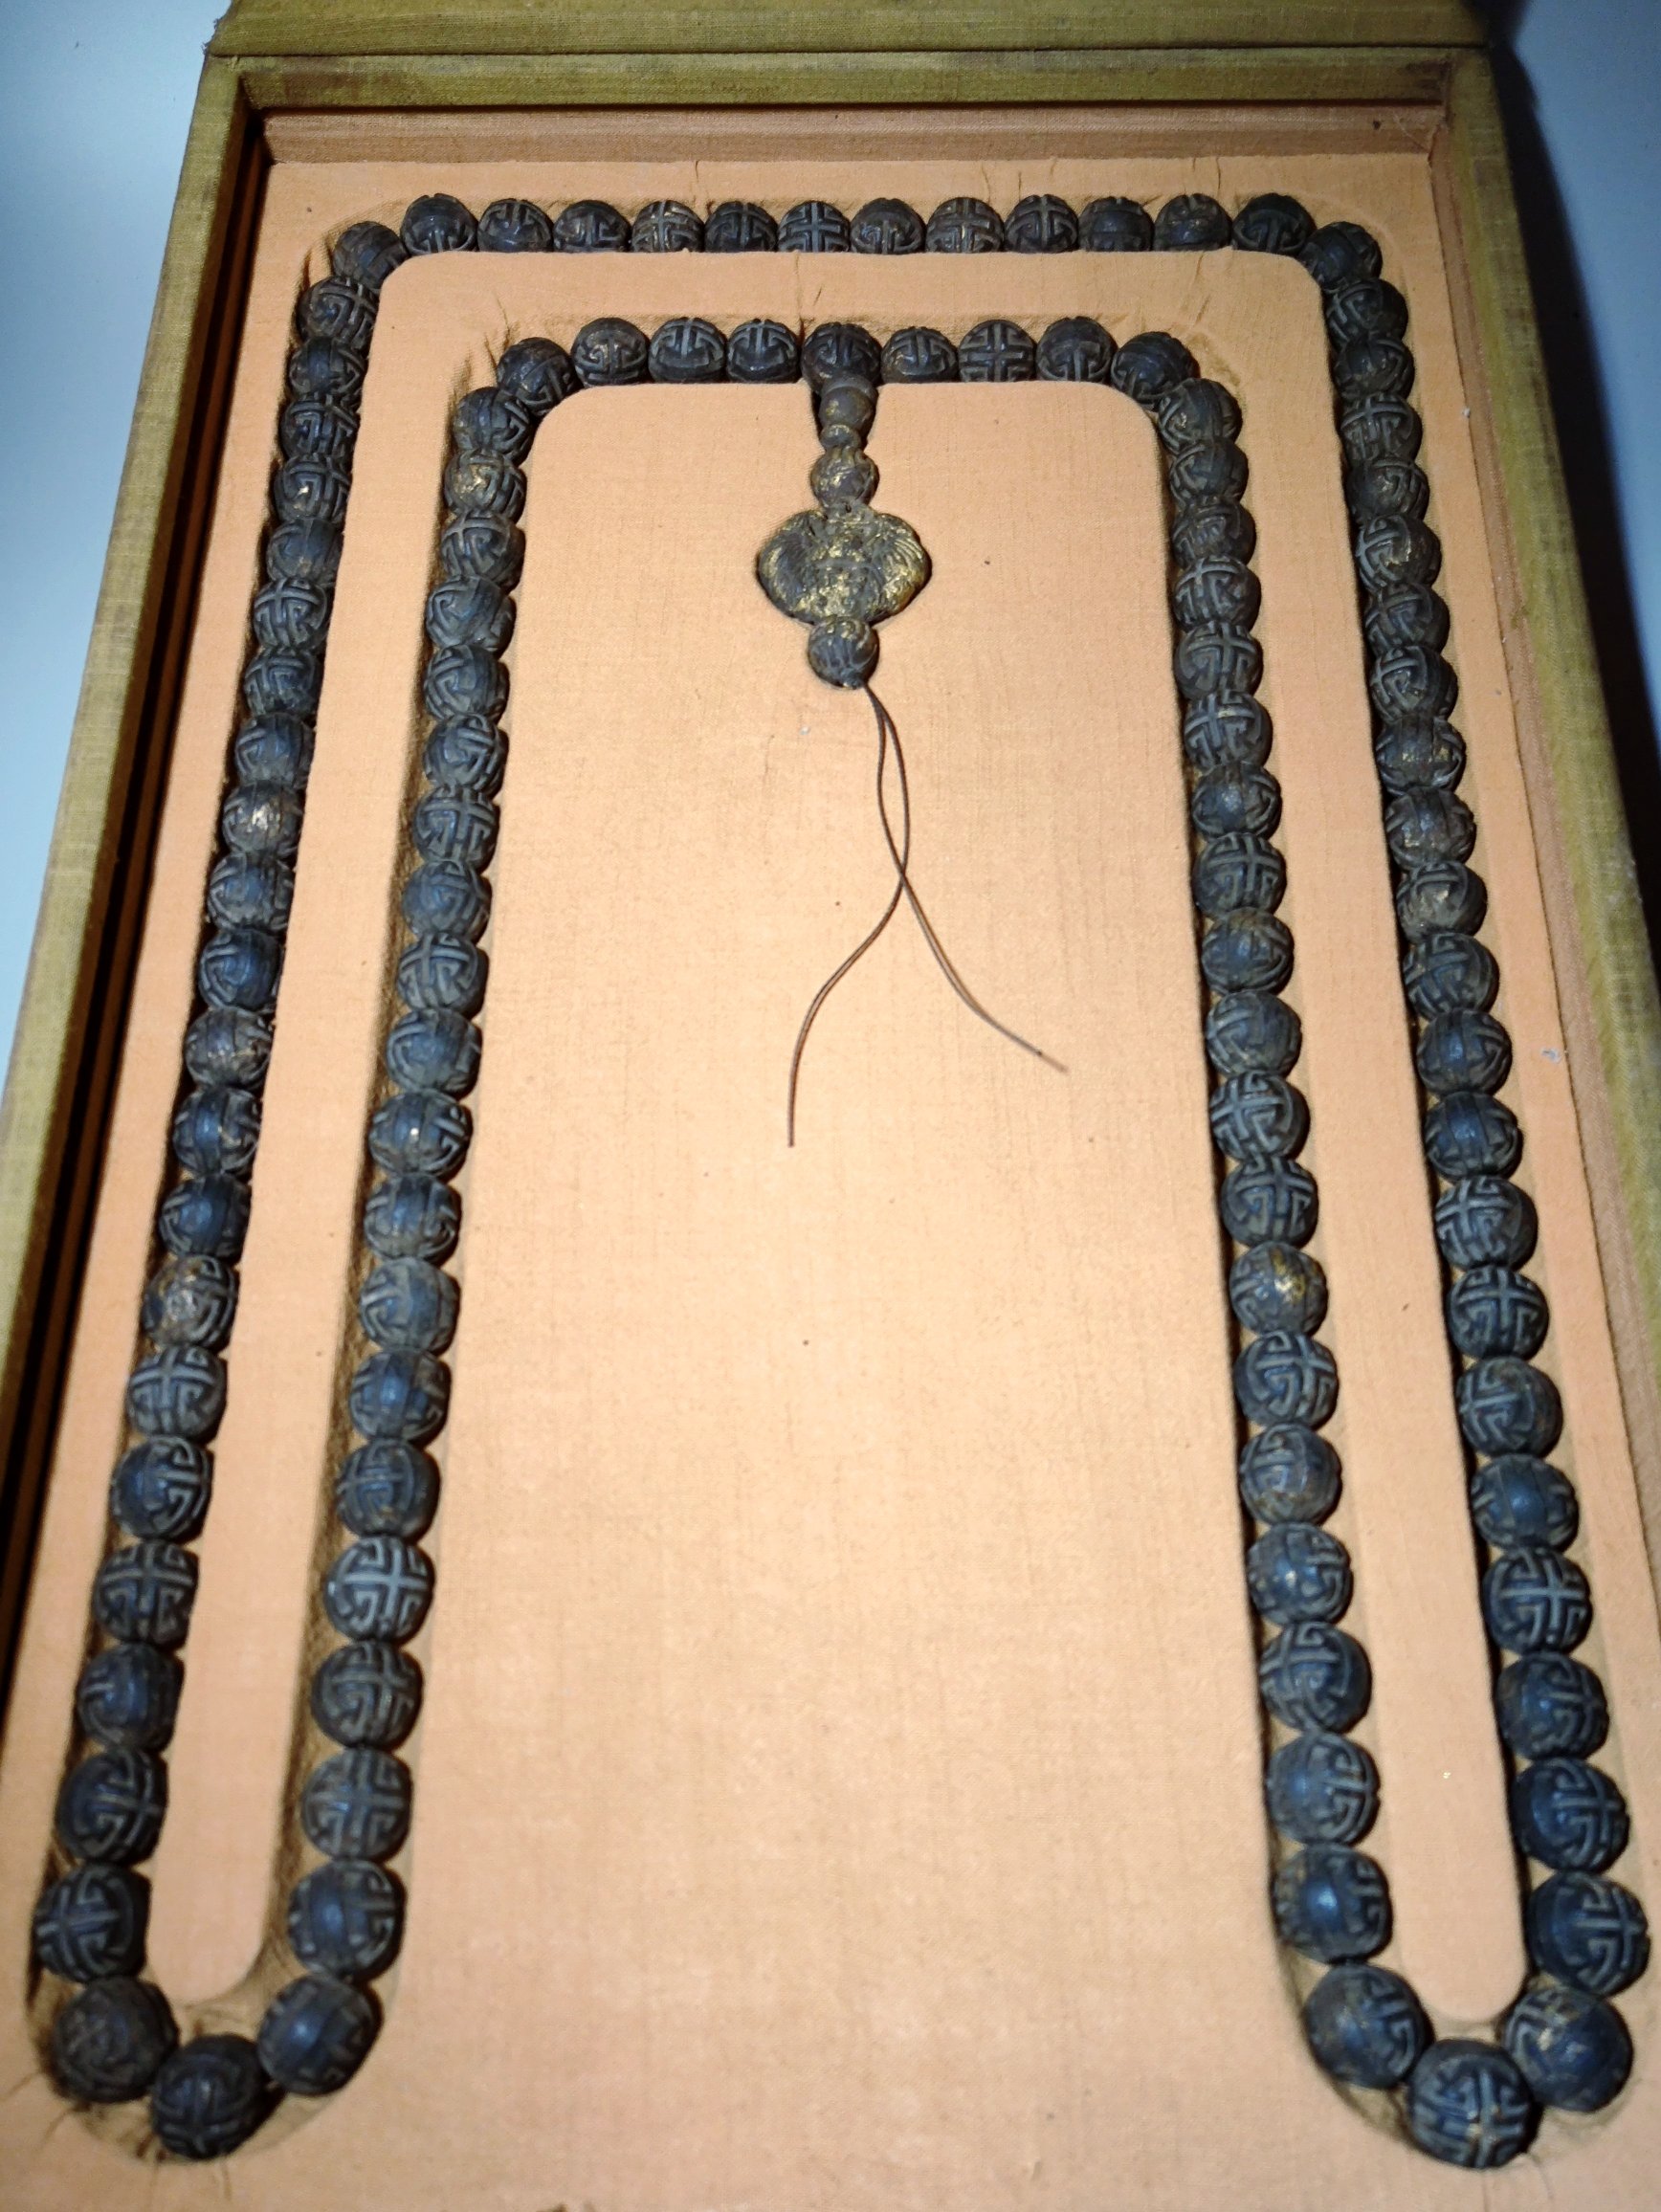 A set of agarwood beads collected by the Qing Palace - Image 3 of 9